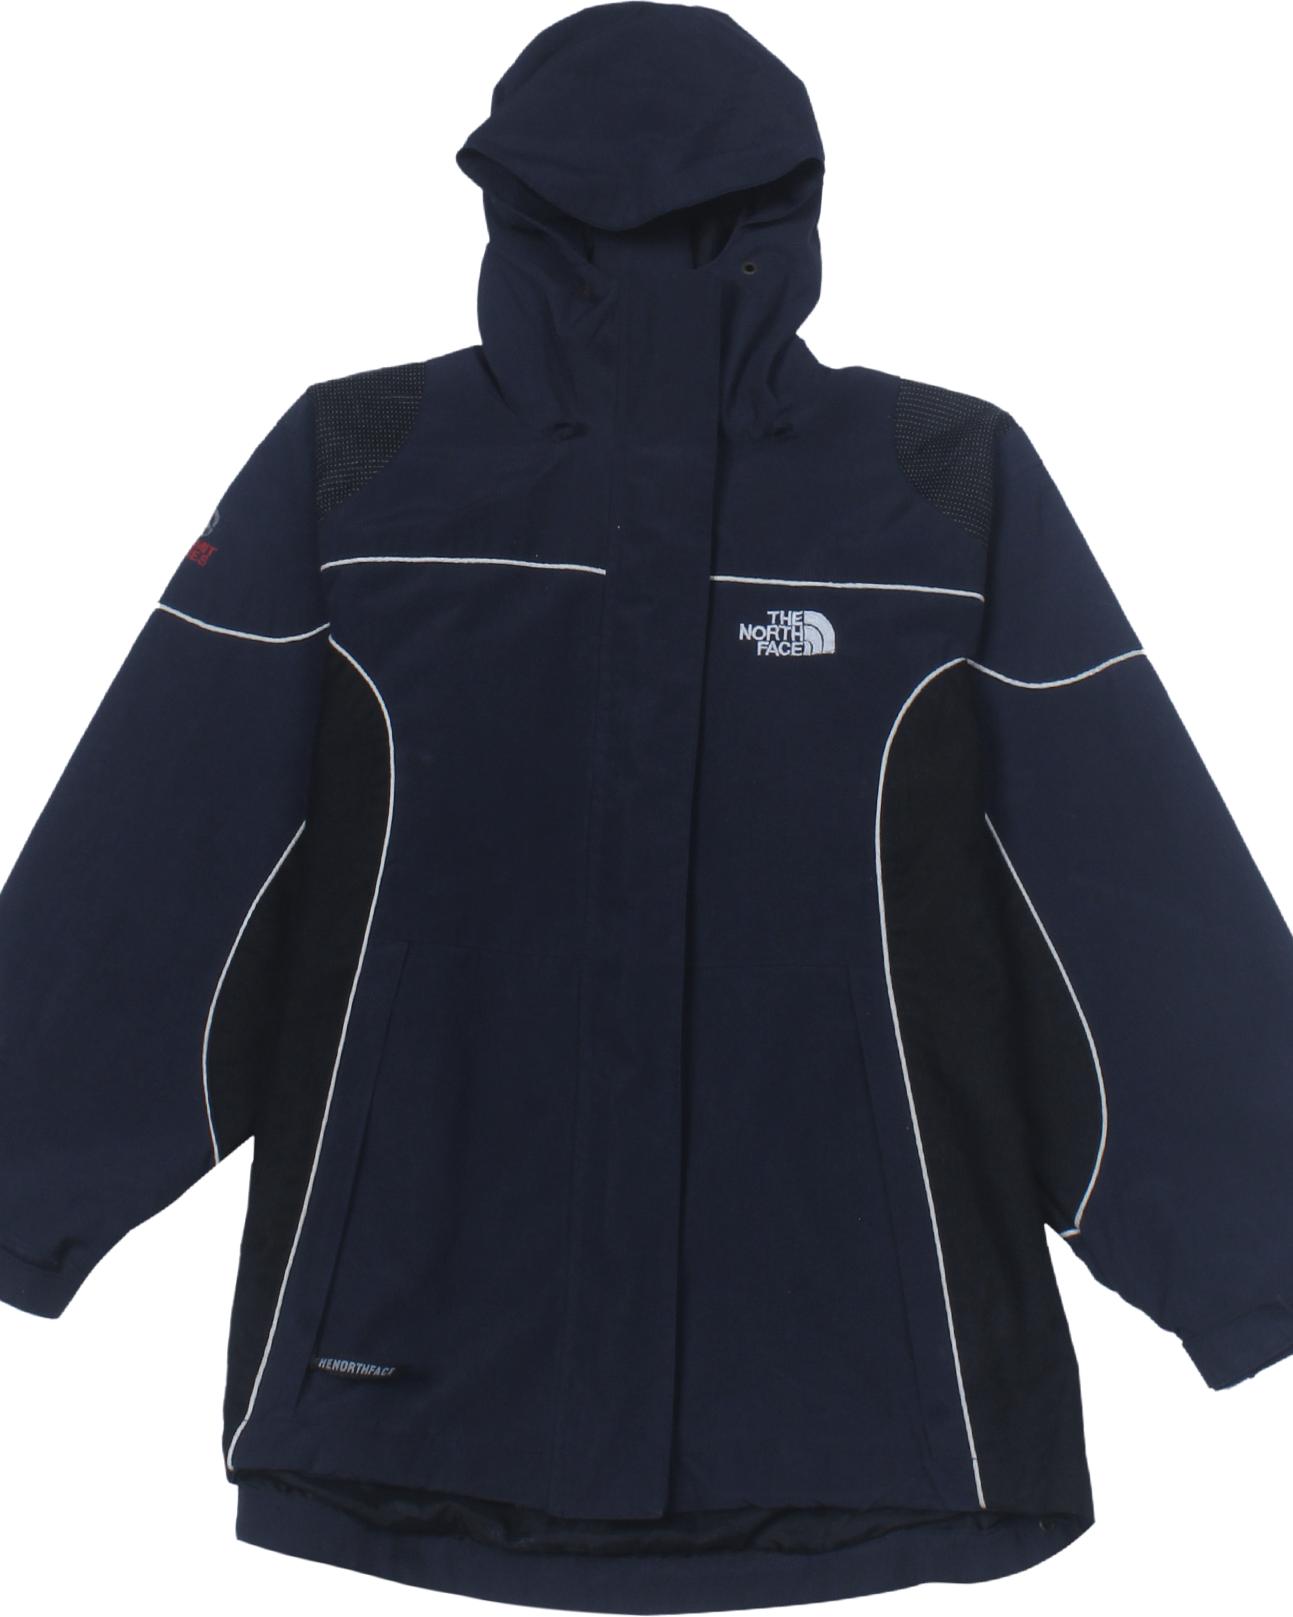 The North Face Jacke bunt